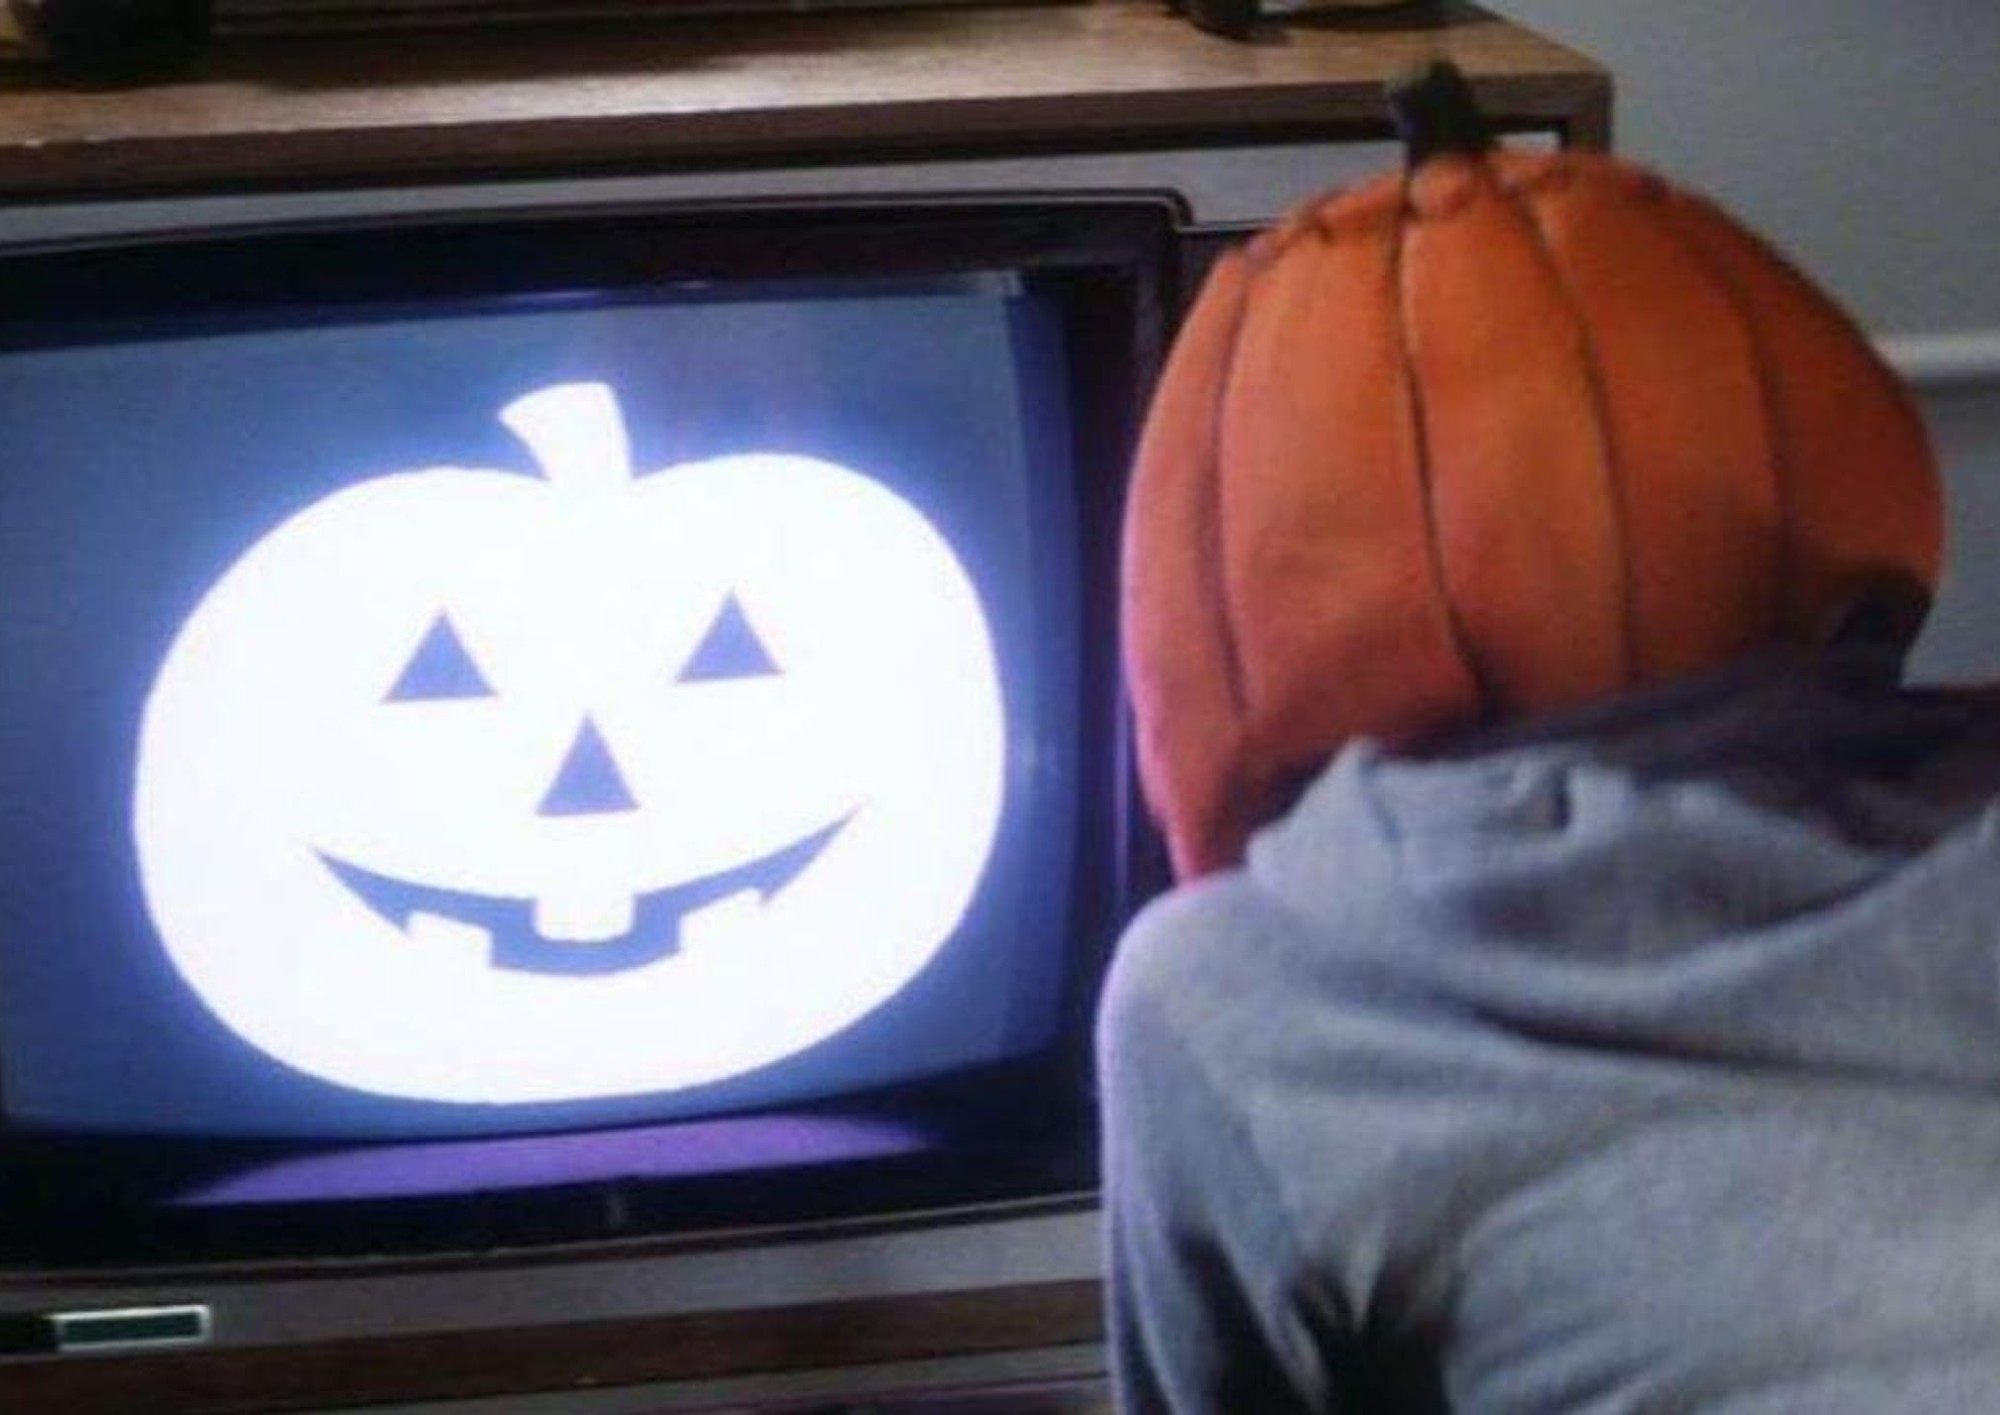 Image from the motion picture Halloween III: Season of the Witch